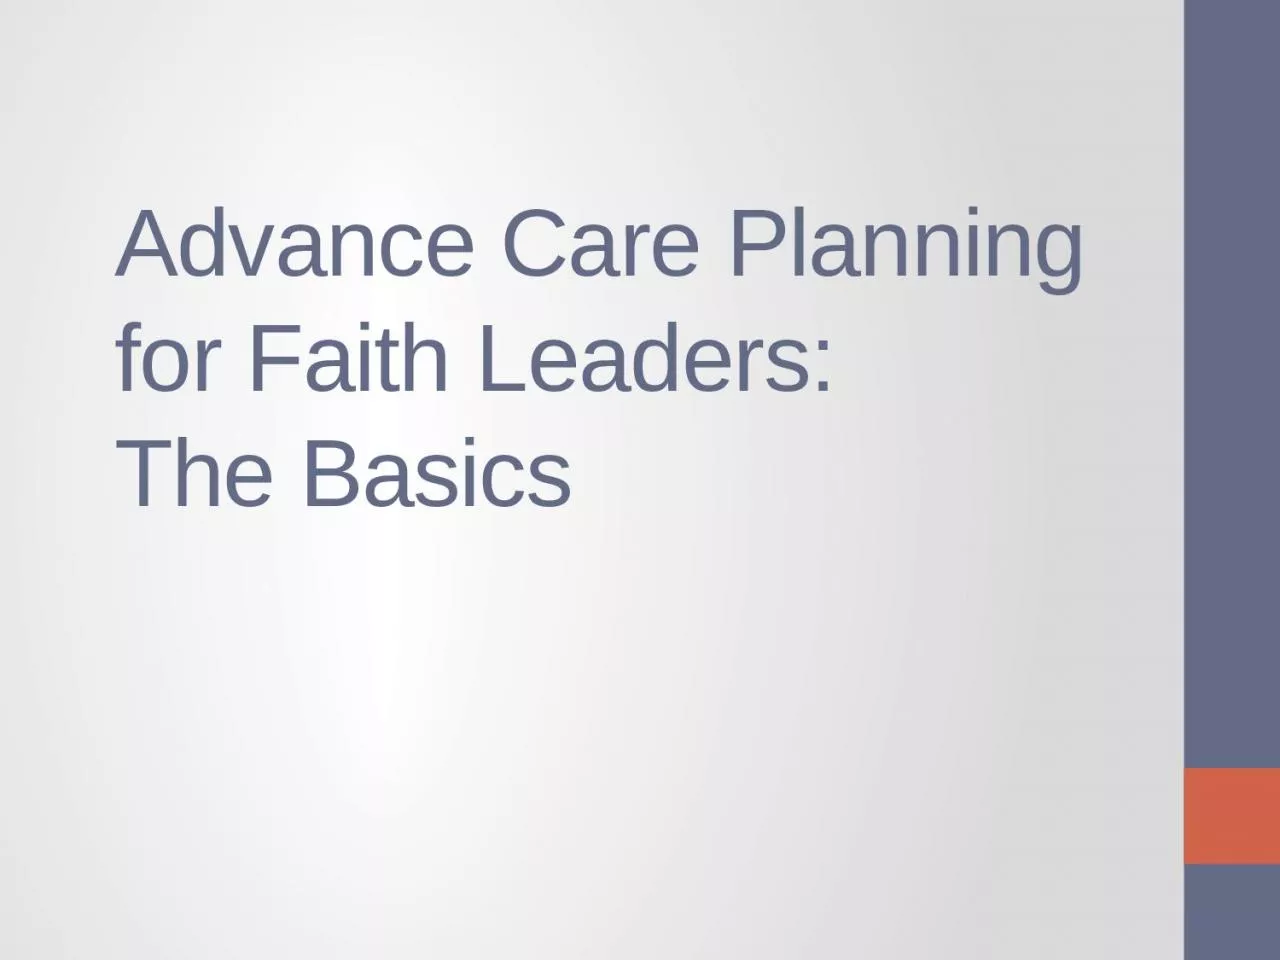 Advance Care Planning for Faith Leaders: